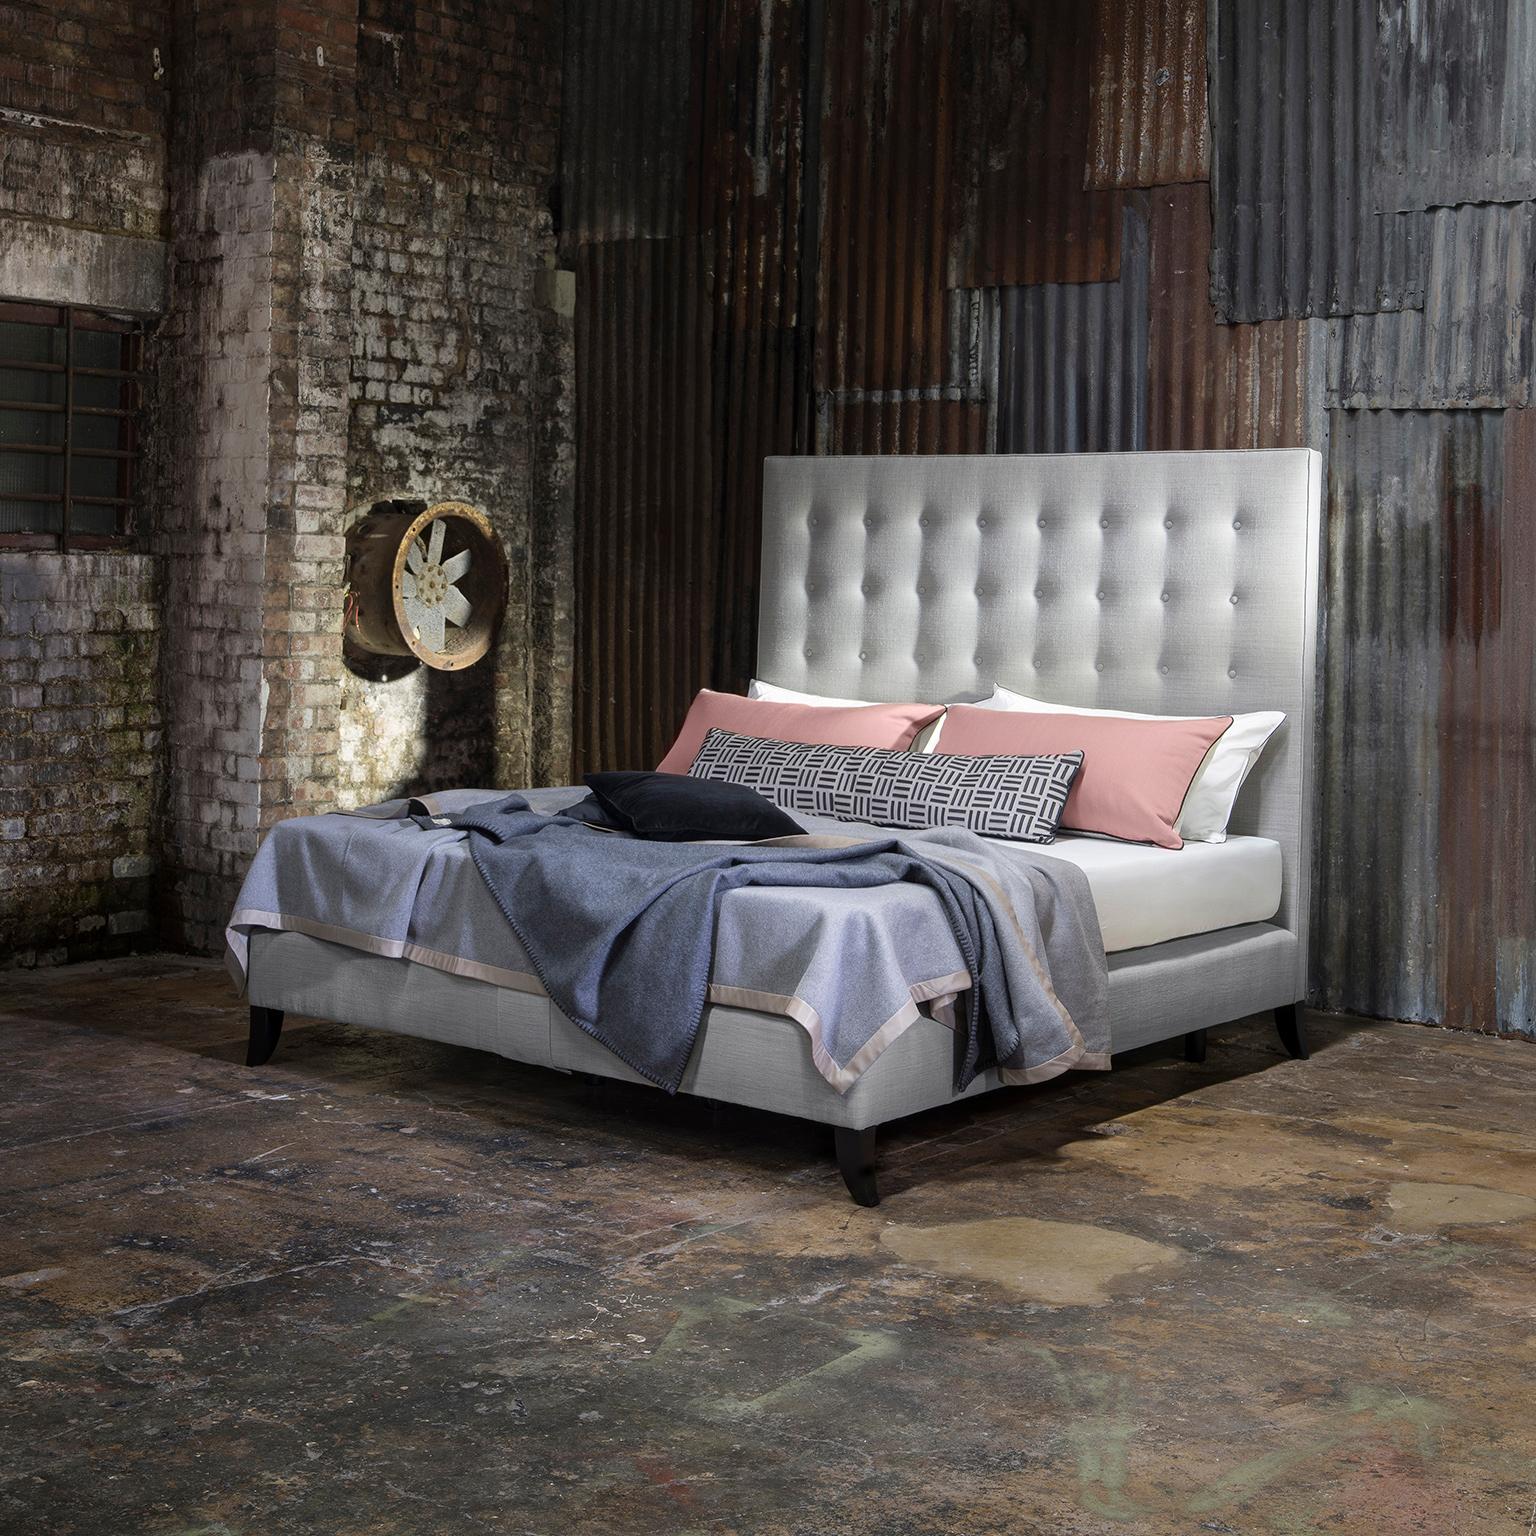 Featuring a statement headboard with Classic styling, the Holly bed oozes timeless style. The oversized headboard with its restrained buttoning and piped edge embraces a modern metropolitan feel. Upholstered in a subtle textured grey fabric from